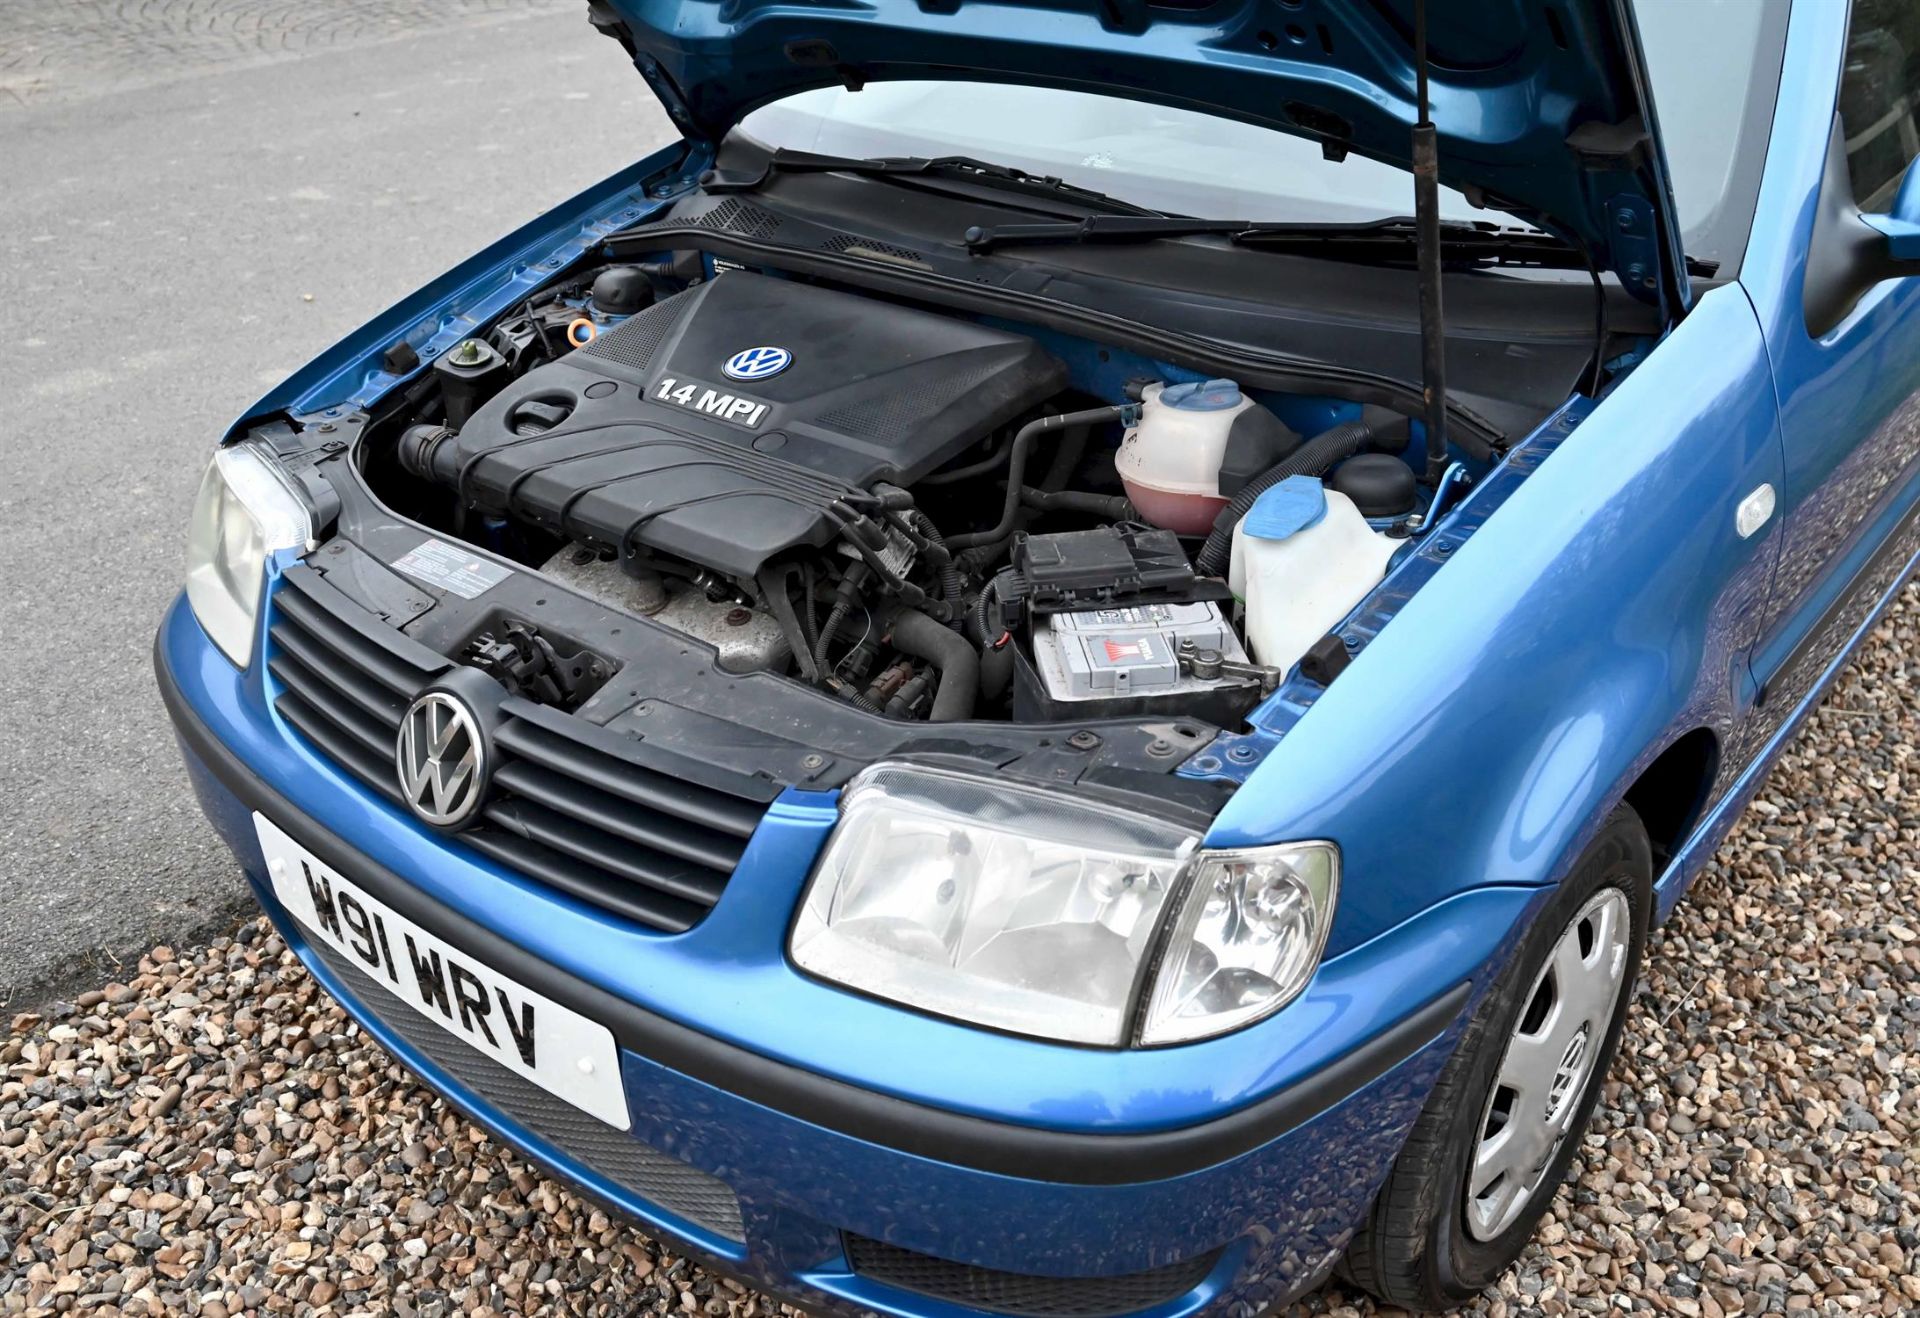 2000 VW Polo 1.4 E 3-door hatchback. Registration number W91 WRV. Petrol, 5-Speed Manual gearbox. - Image 9 of 9